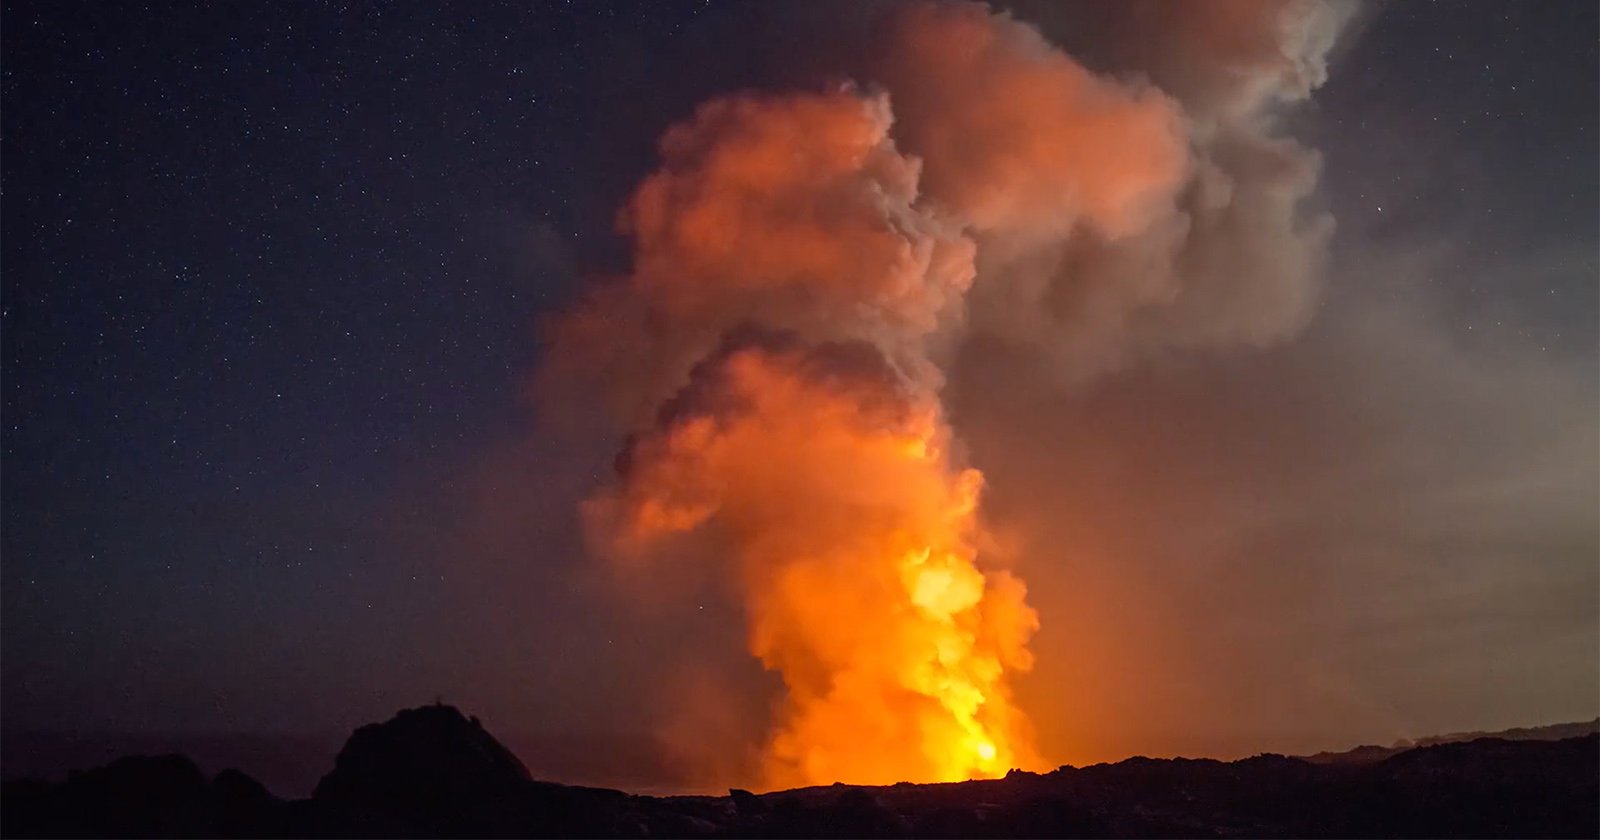 Dramatic Timelapse Captures the Stars Above Lava Flowing Into the Ocean